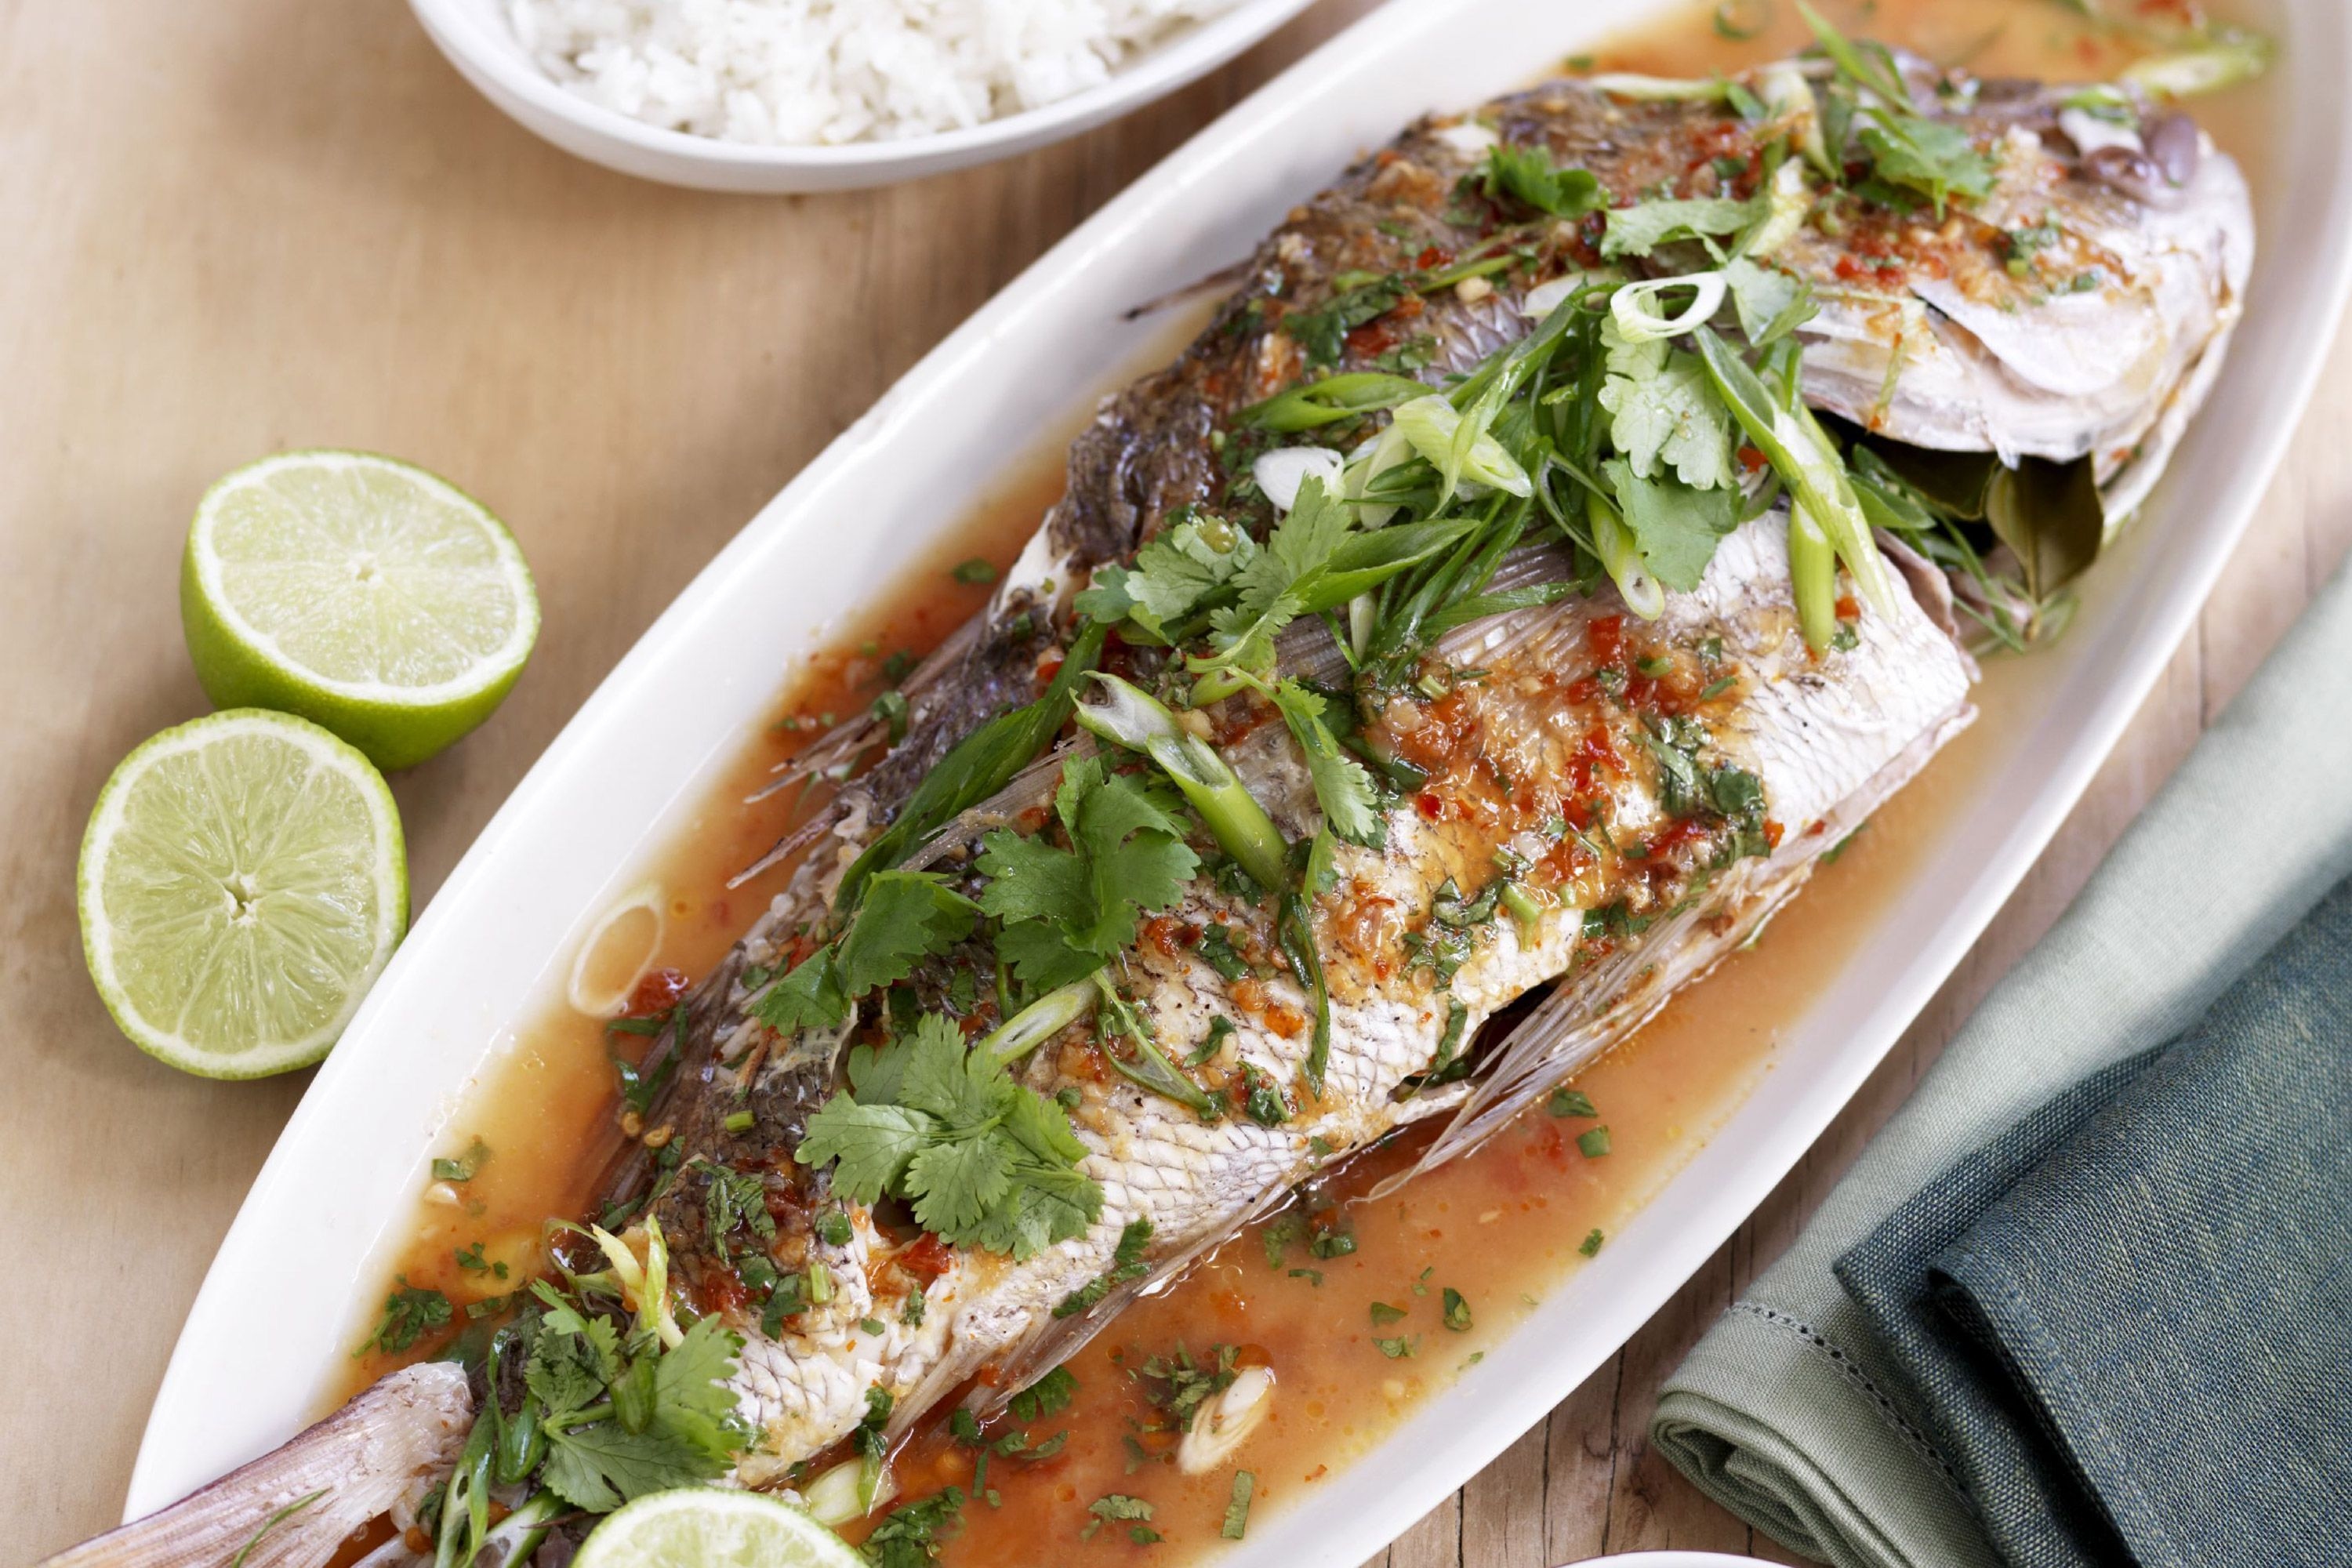 59. Steamed Whole Fish with Lime Juice/ 蒸し魚のライムソース添え